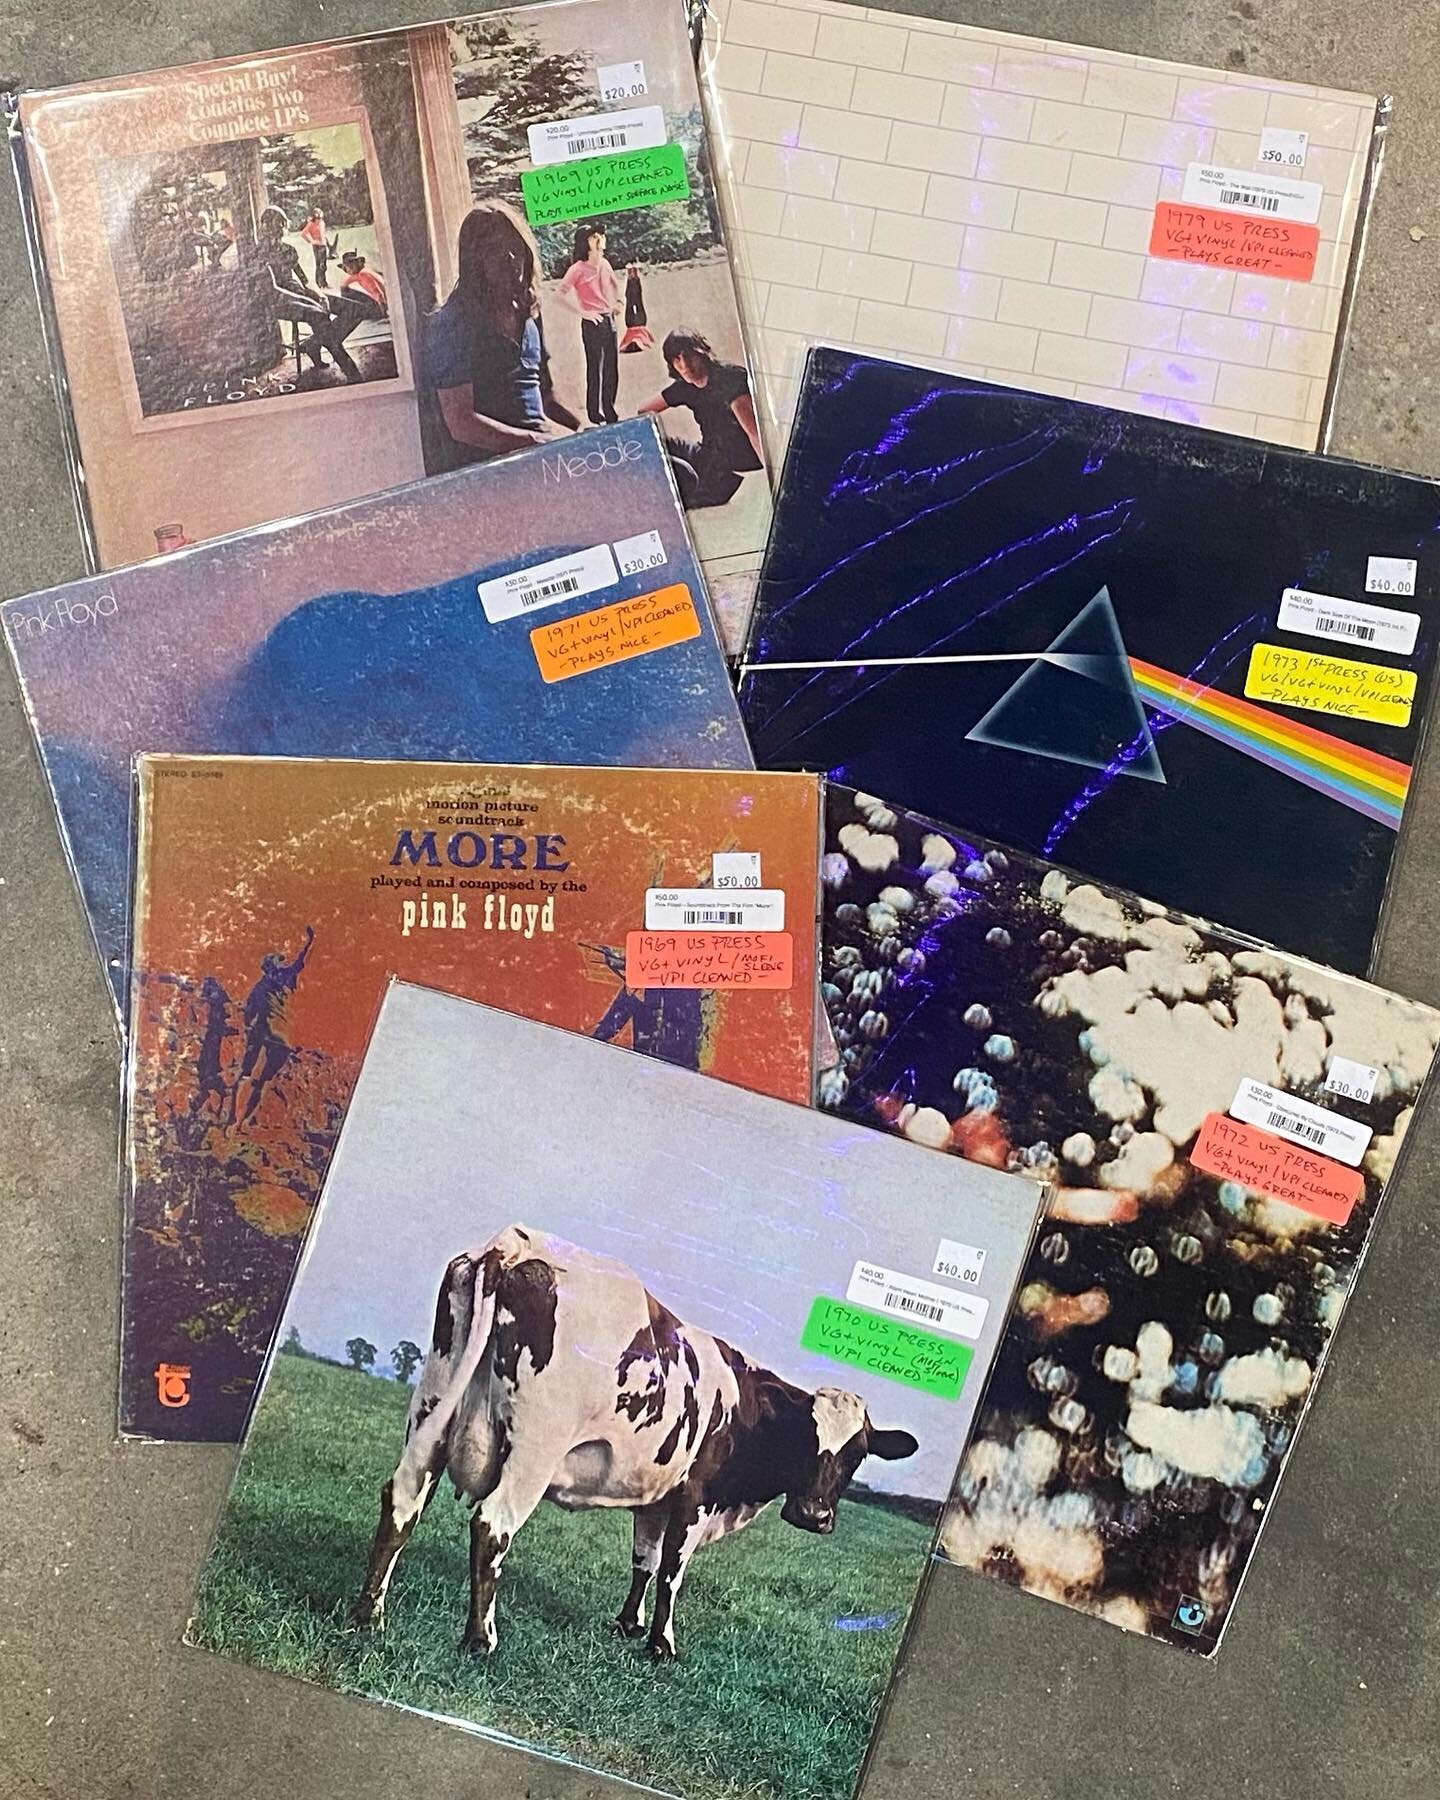 Some nice original Pink Floyd records going out now! @remixrecordshop @mills50district @pinkfloyd